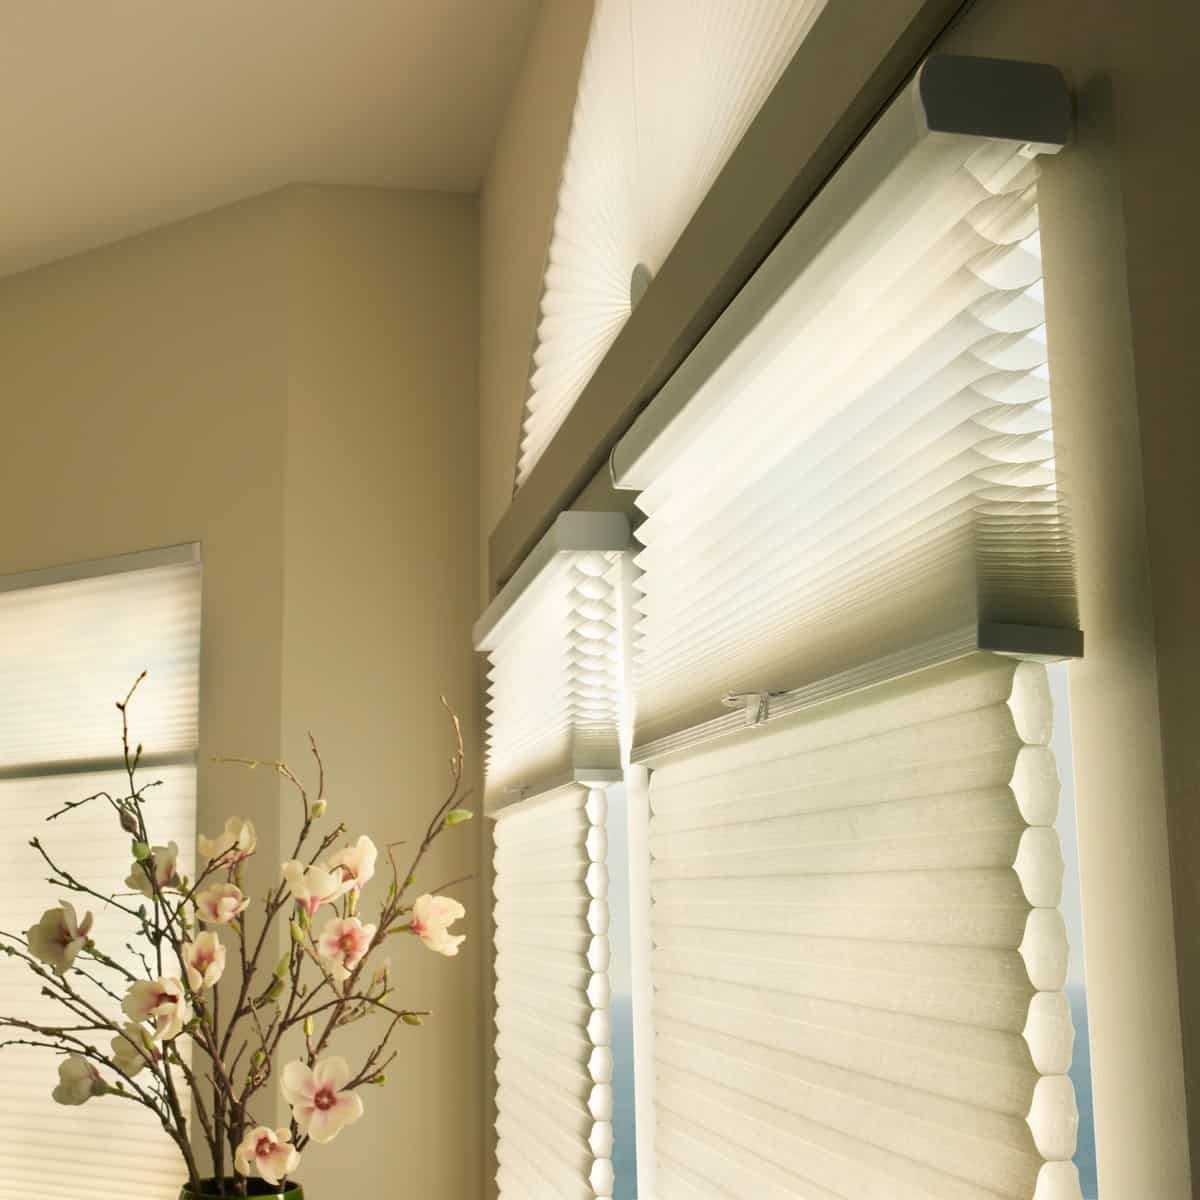 Energy Efficient Window Treatments for Your Home near Gresham & Portland, Oregon (OR) including Shutters and Honeycomb Shades